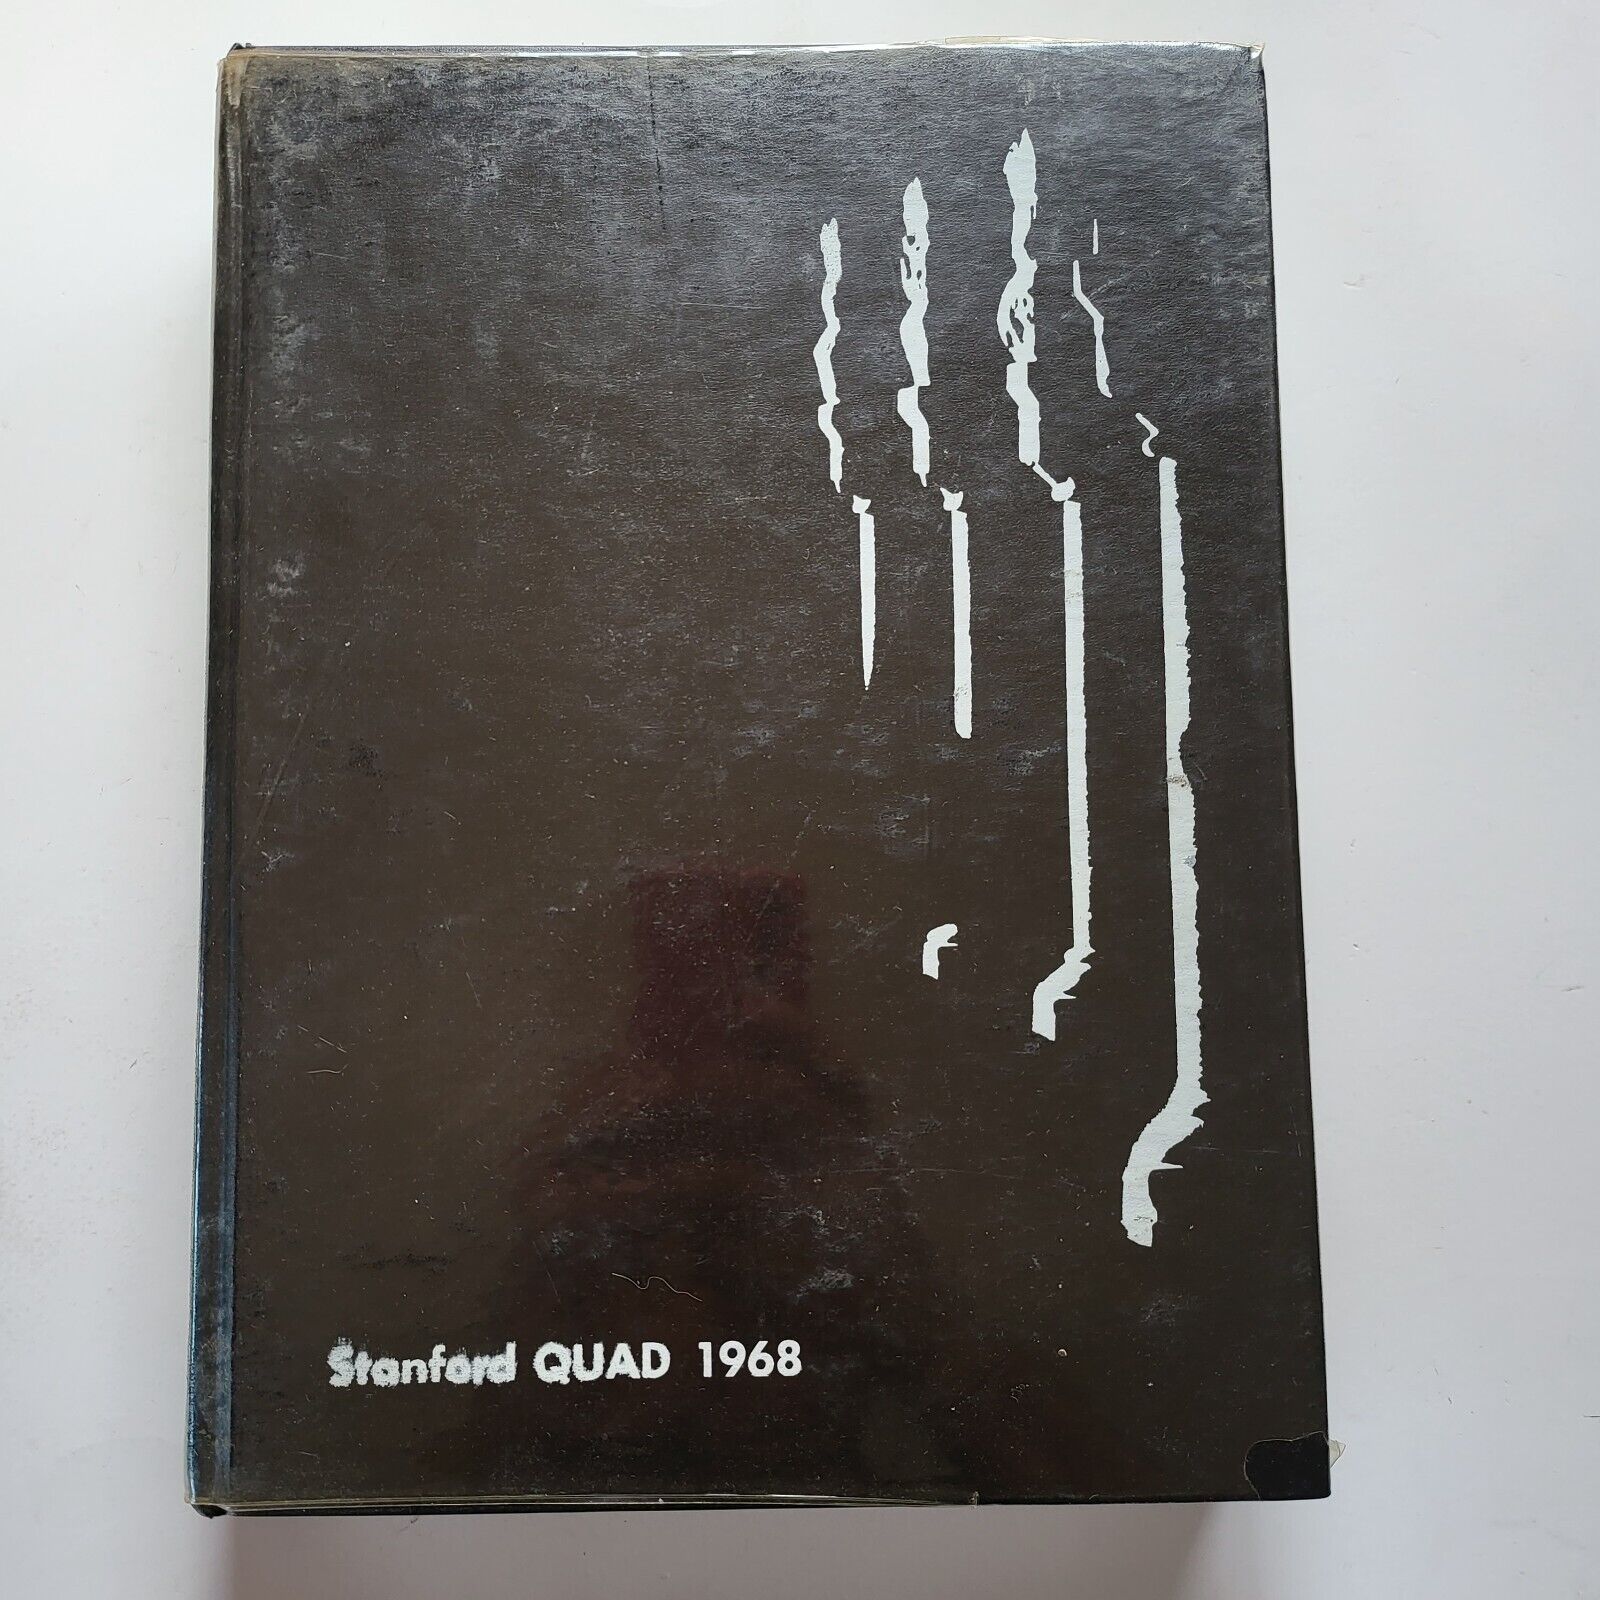 Vintage 1968 Stanford Quad University Yearbook No Signatures w Book Cover Vol 75